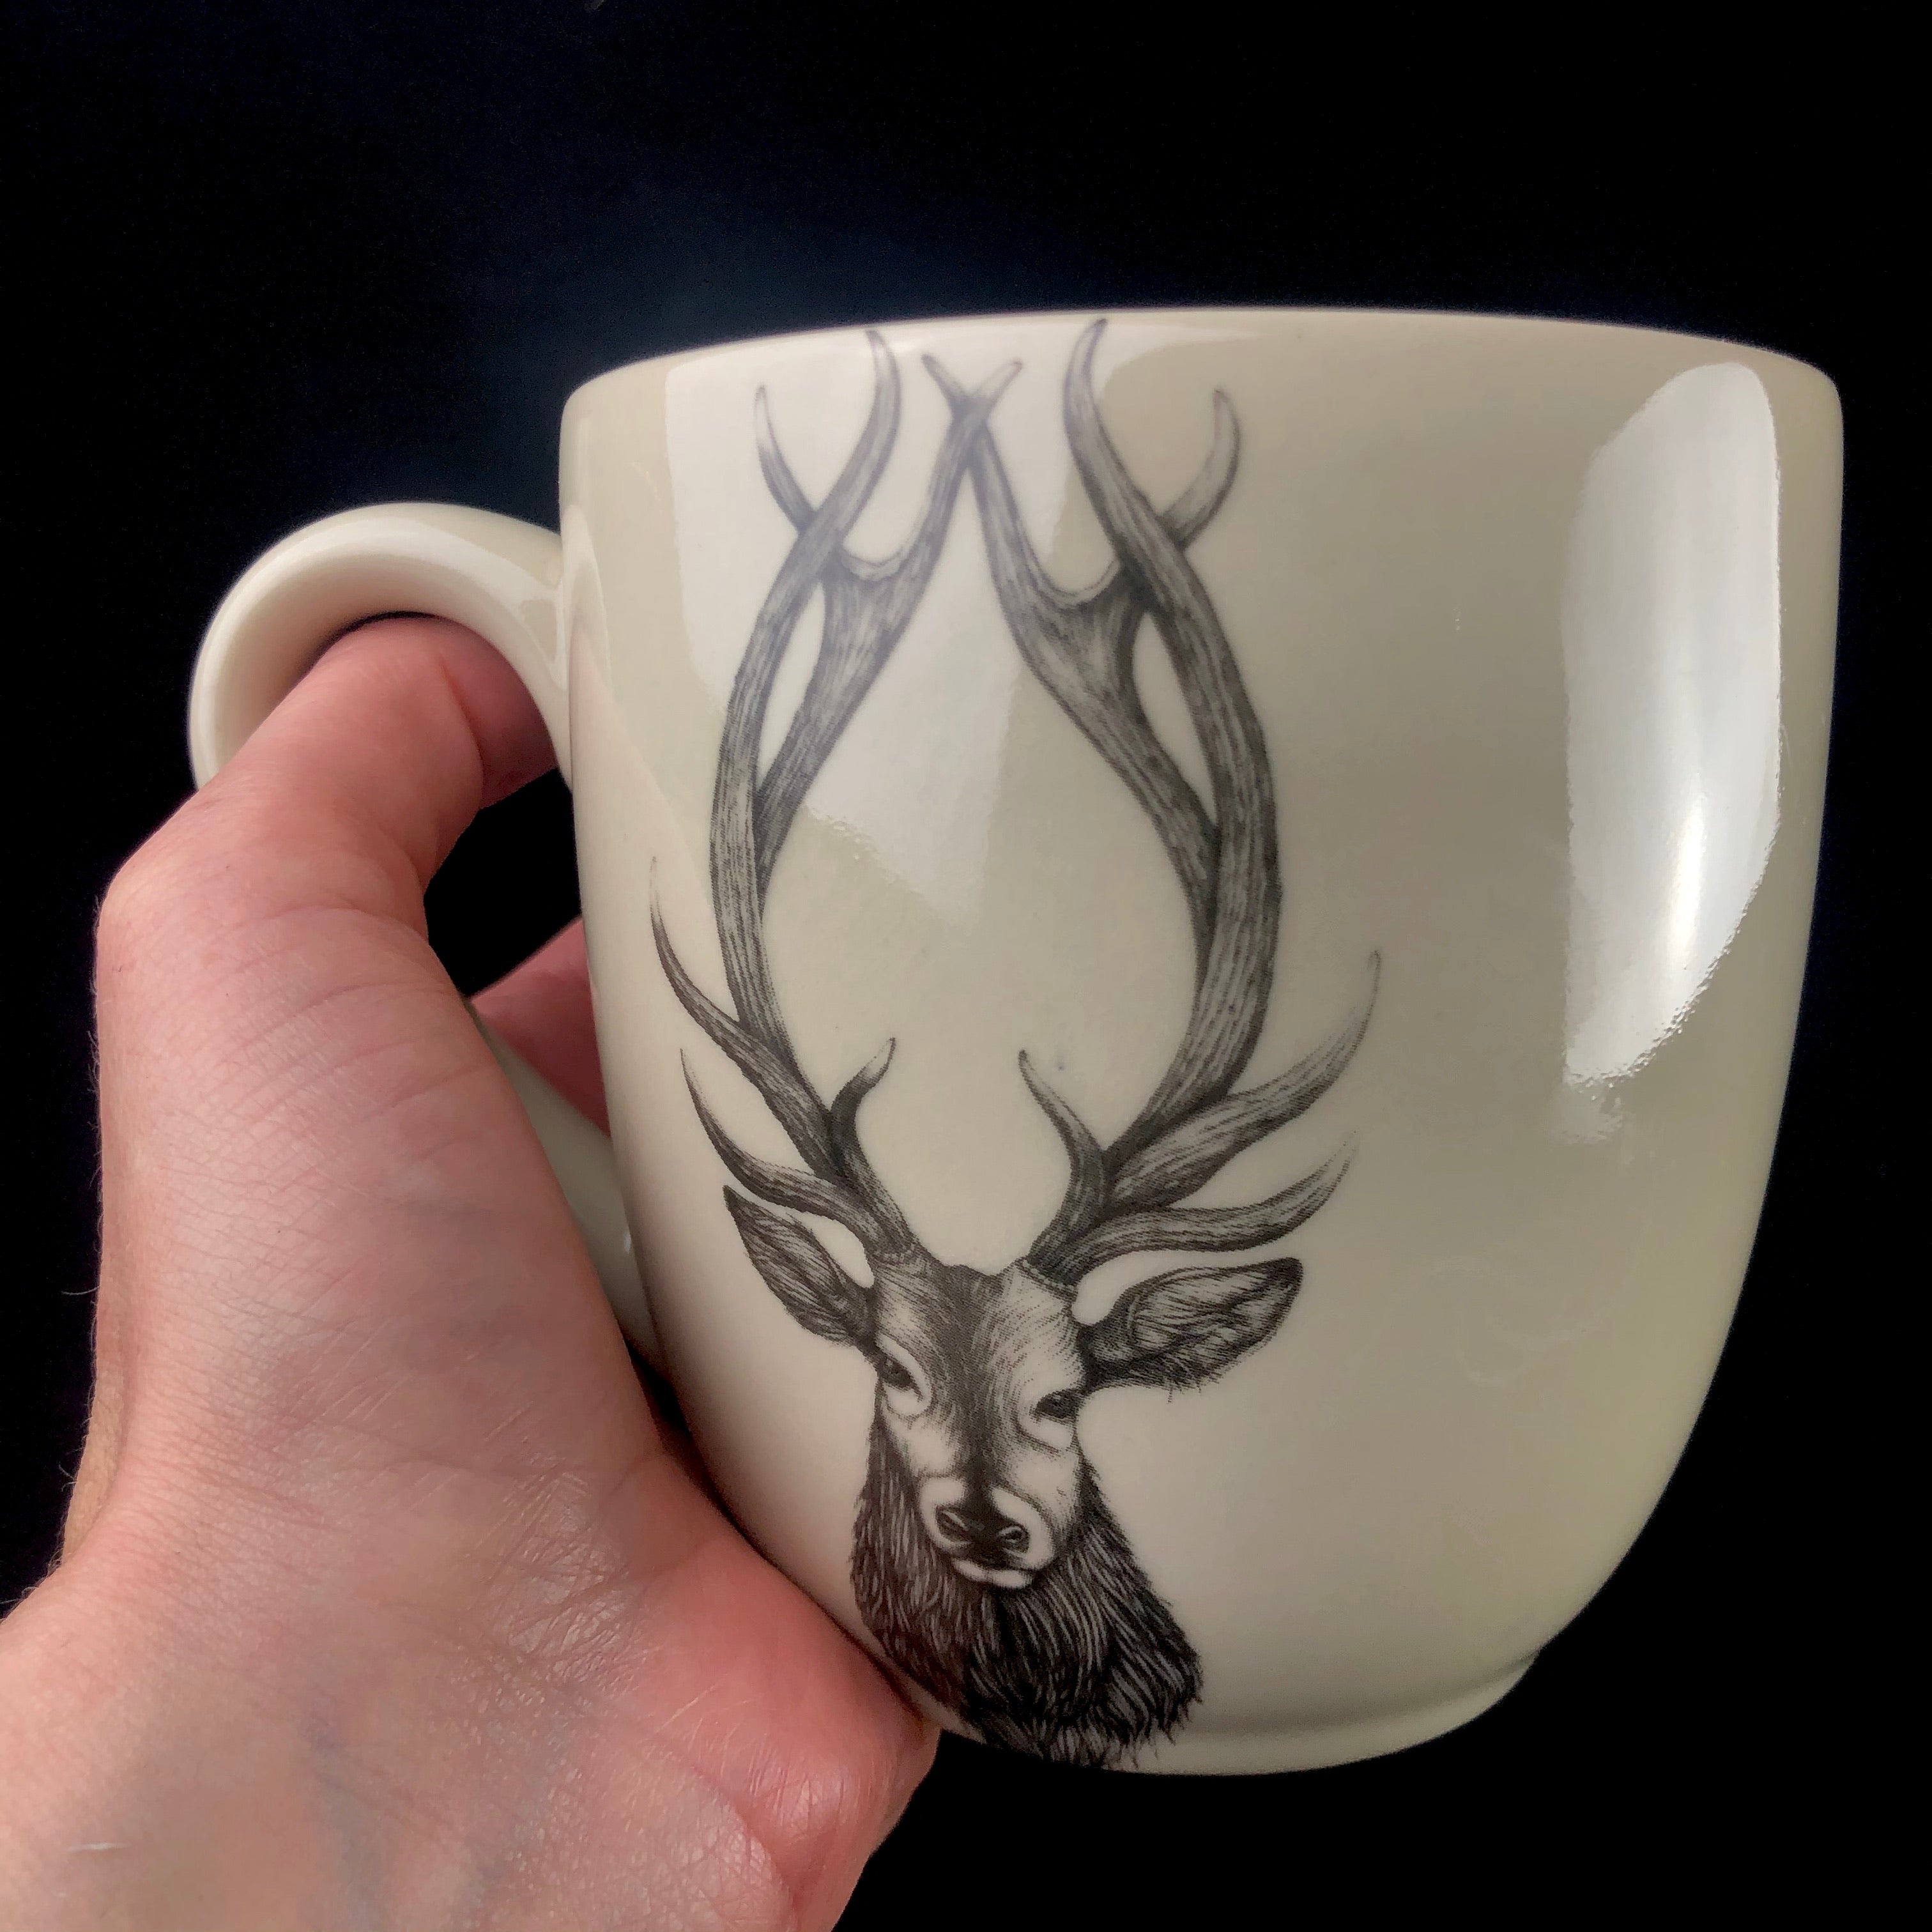 Buck Mug shown in hand for size reference